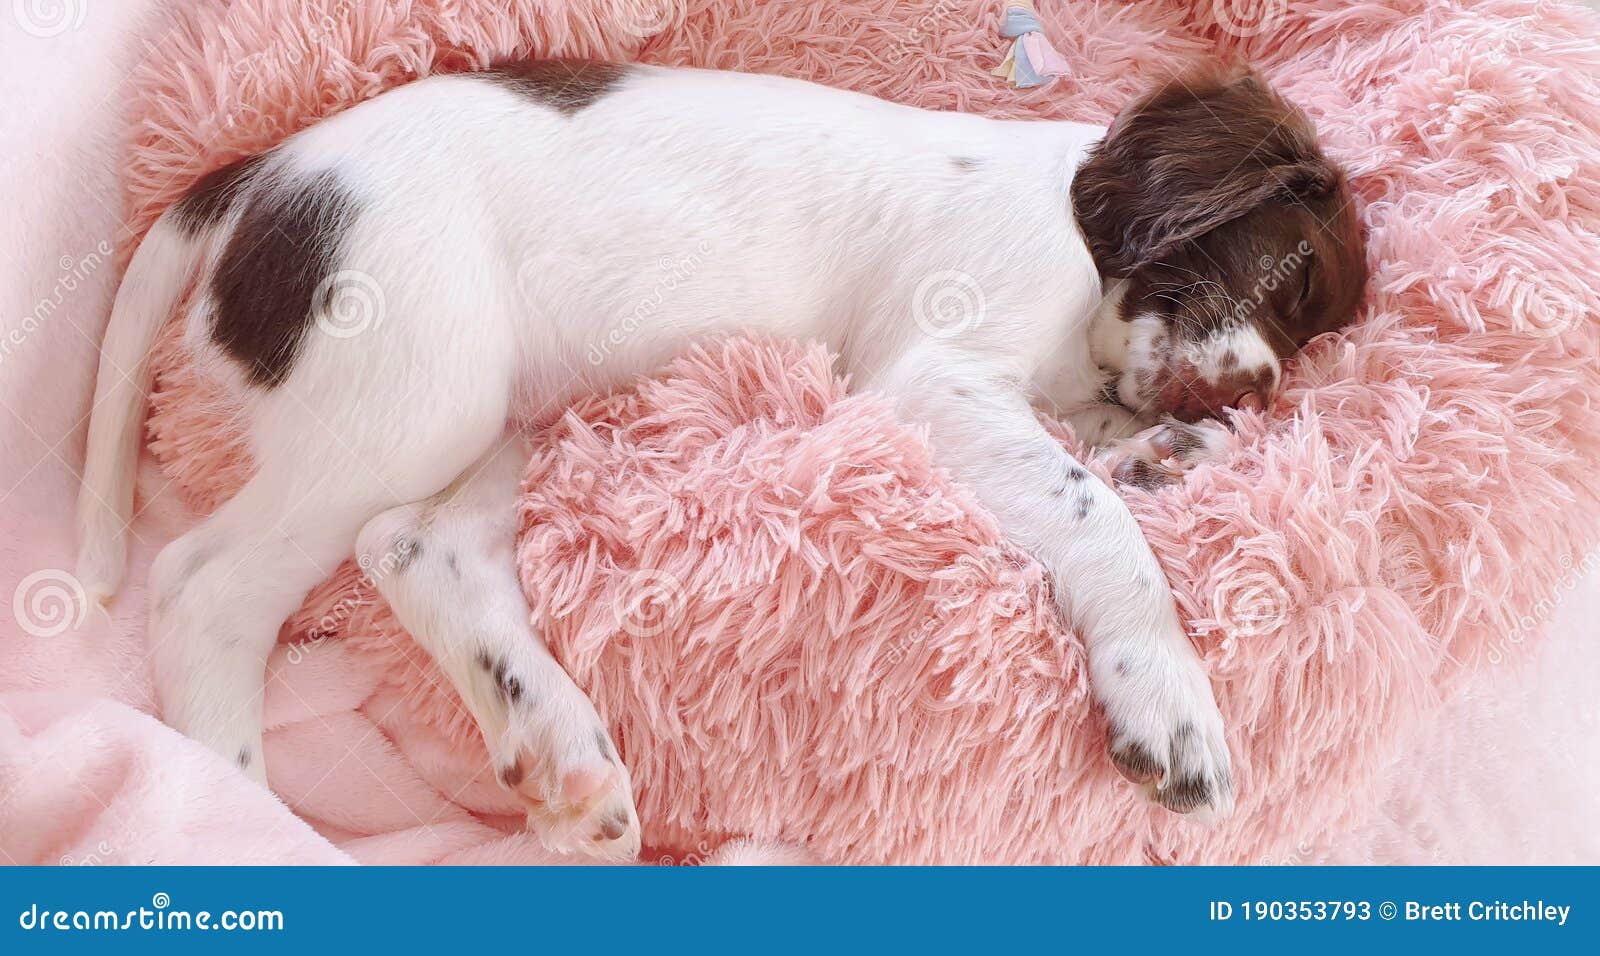 sleeping puppy dog on pink bed